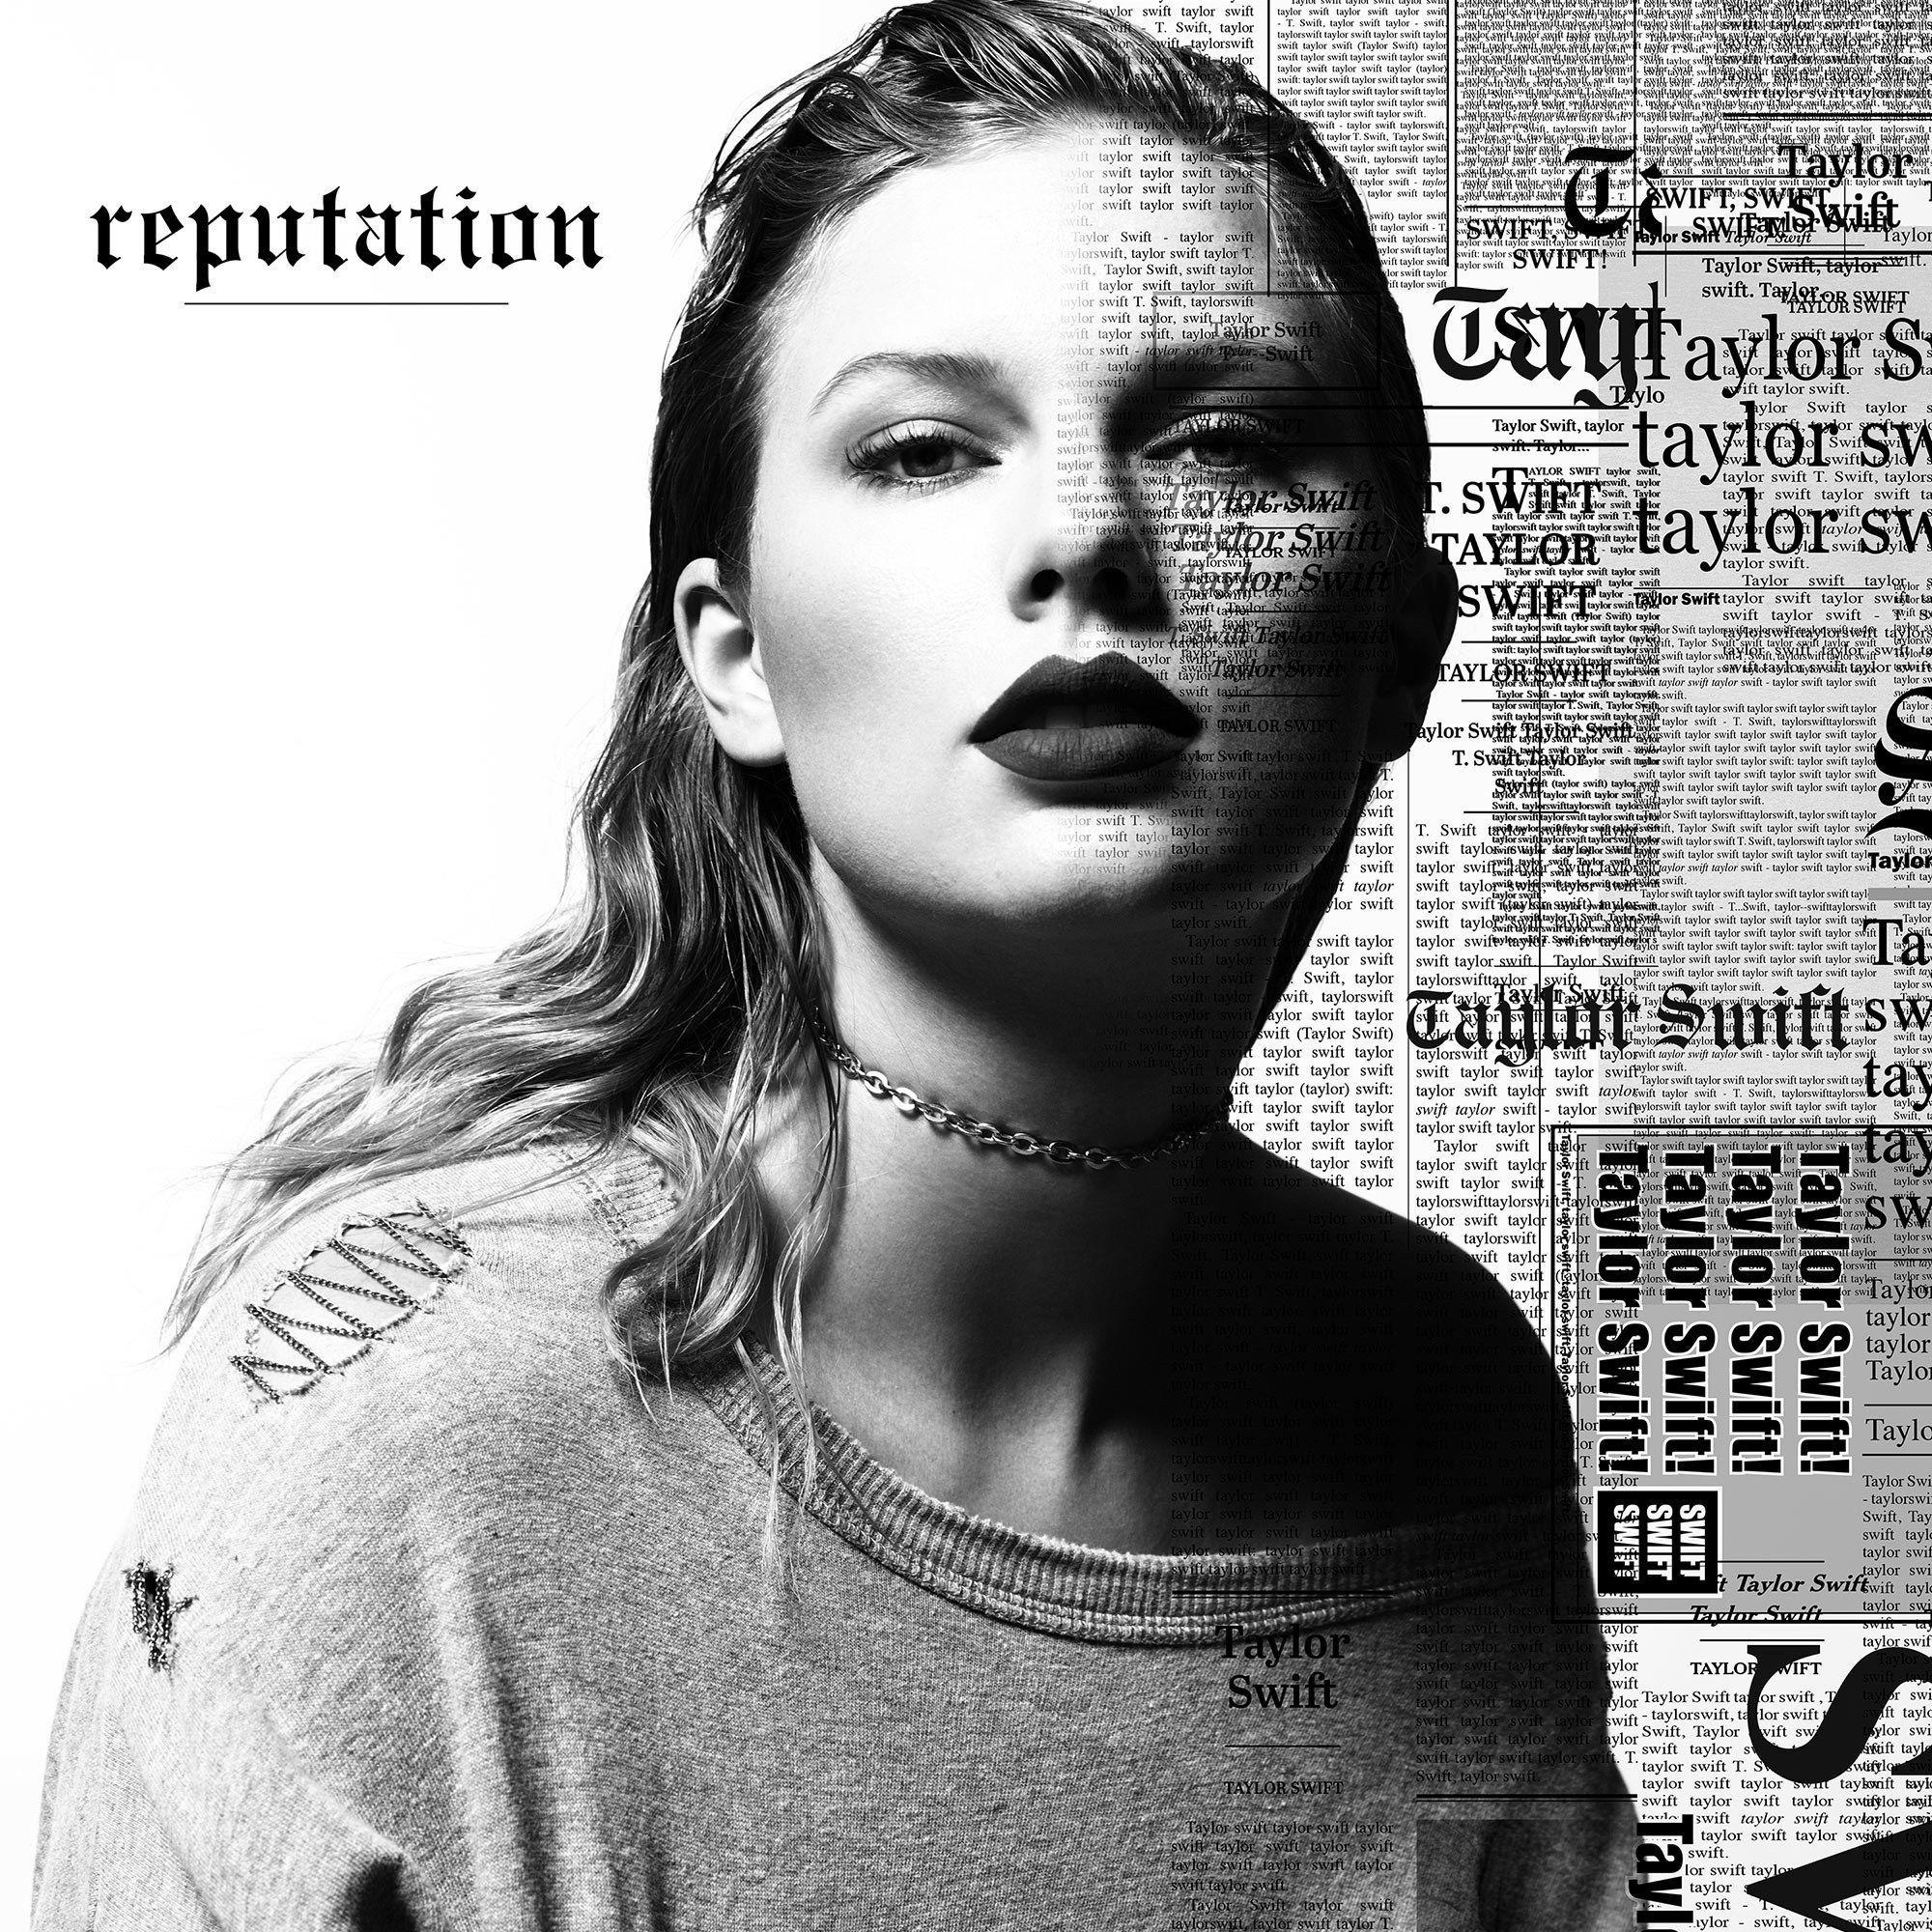 taylor swift reputation wallpapers top free taylor swift reputation backgrounds wallpaperaccess taylor swift reputation wallpapers